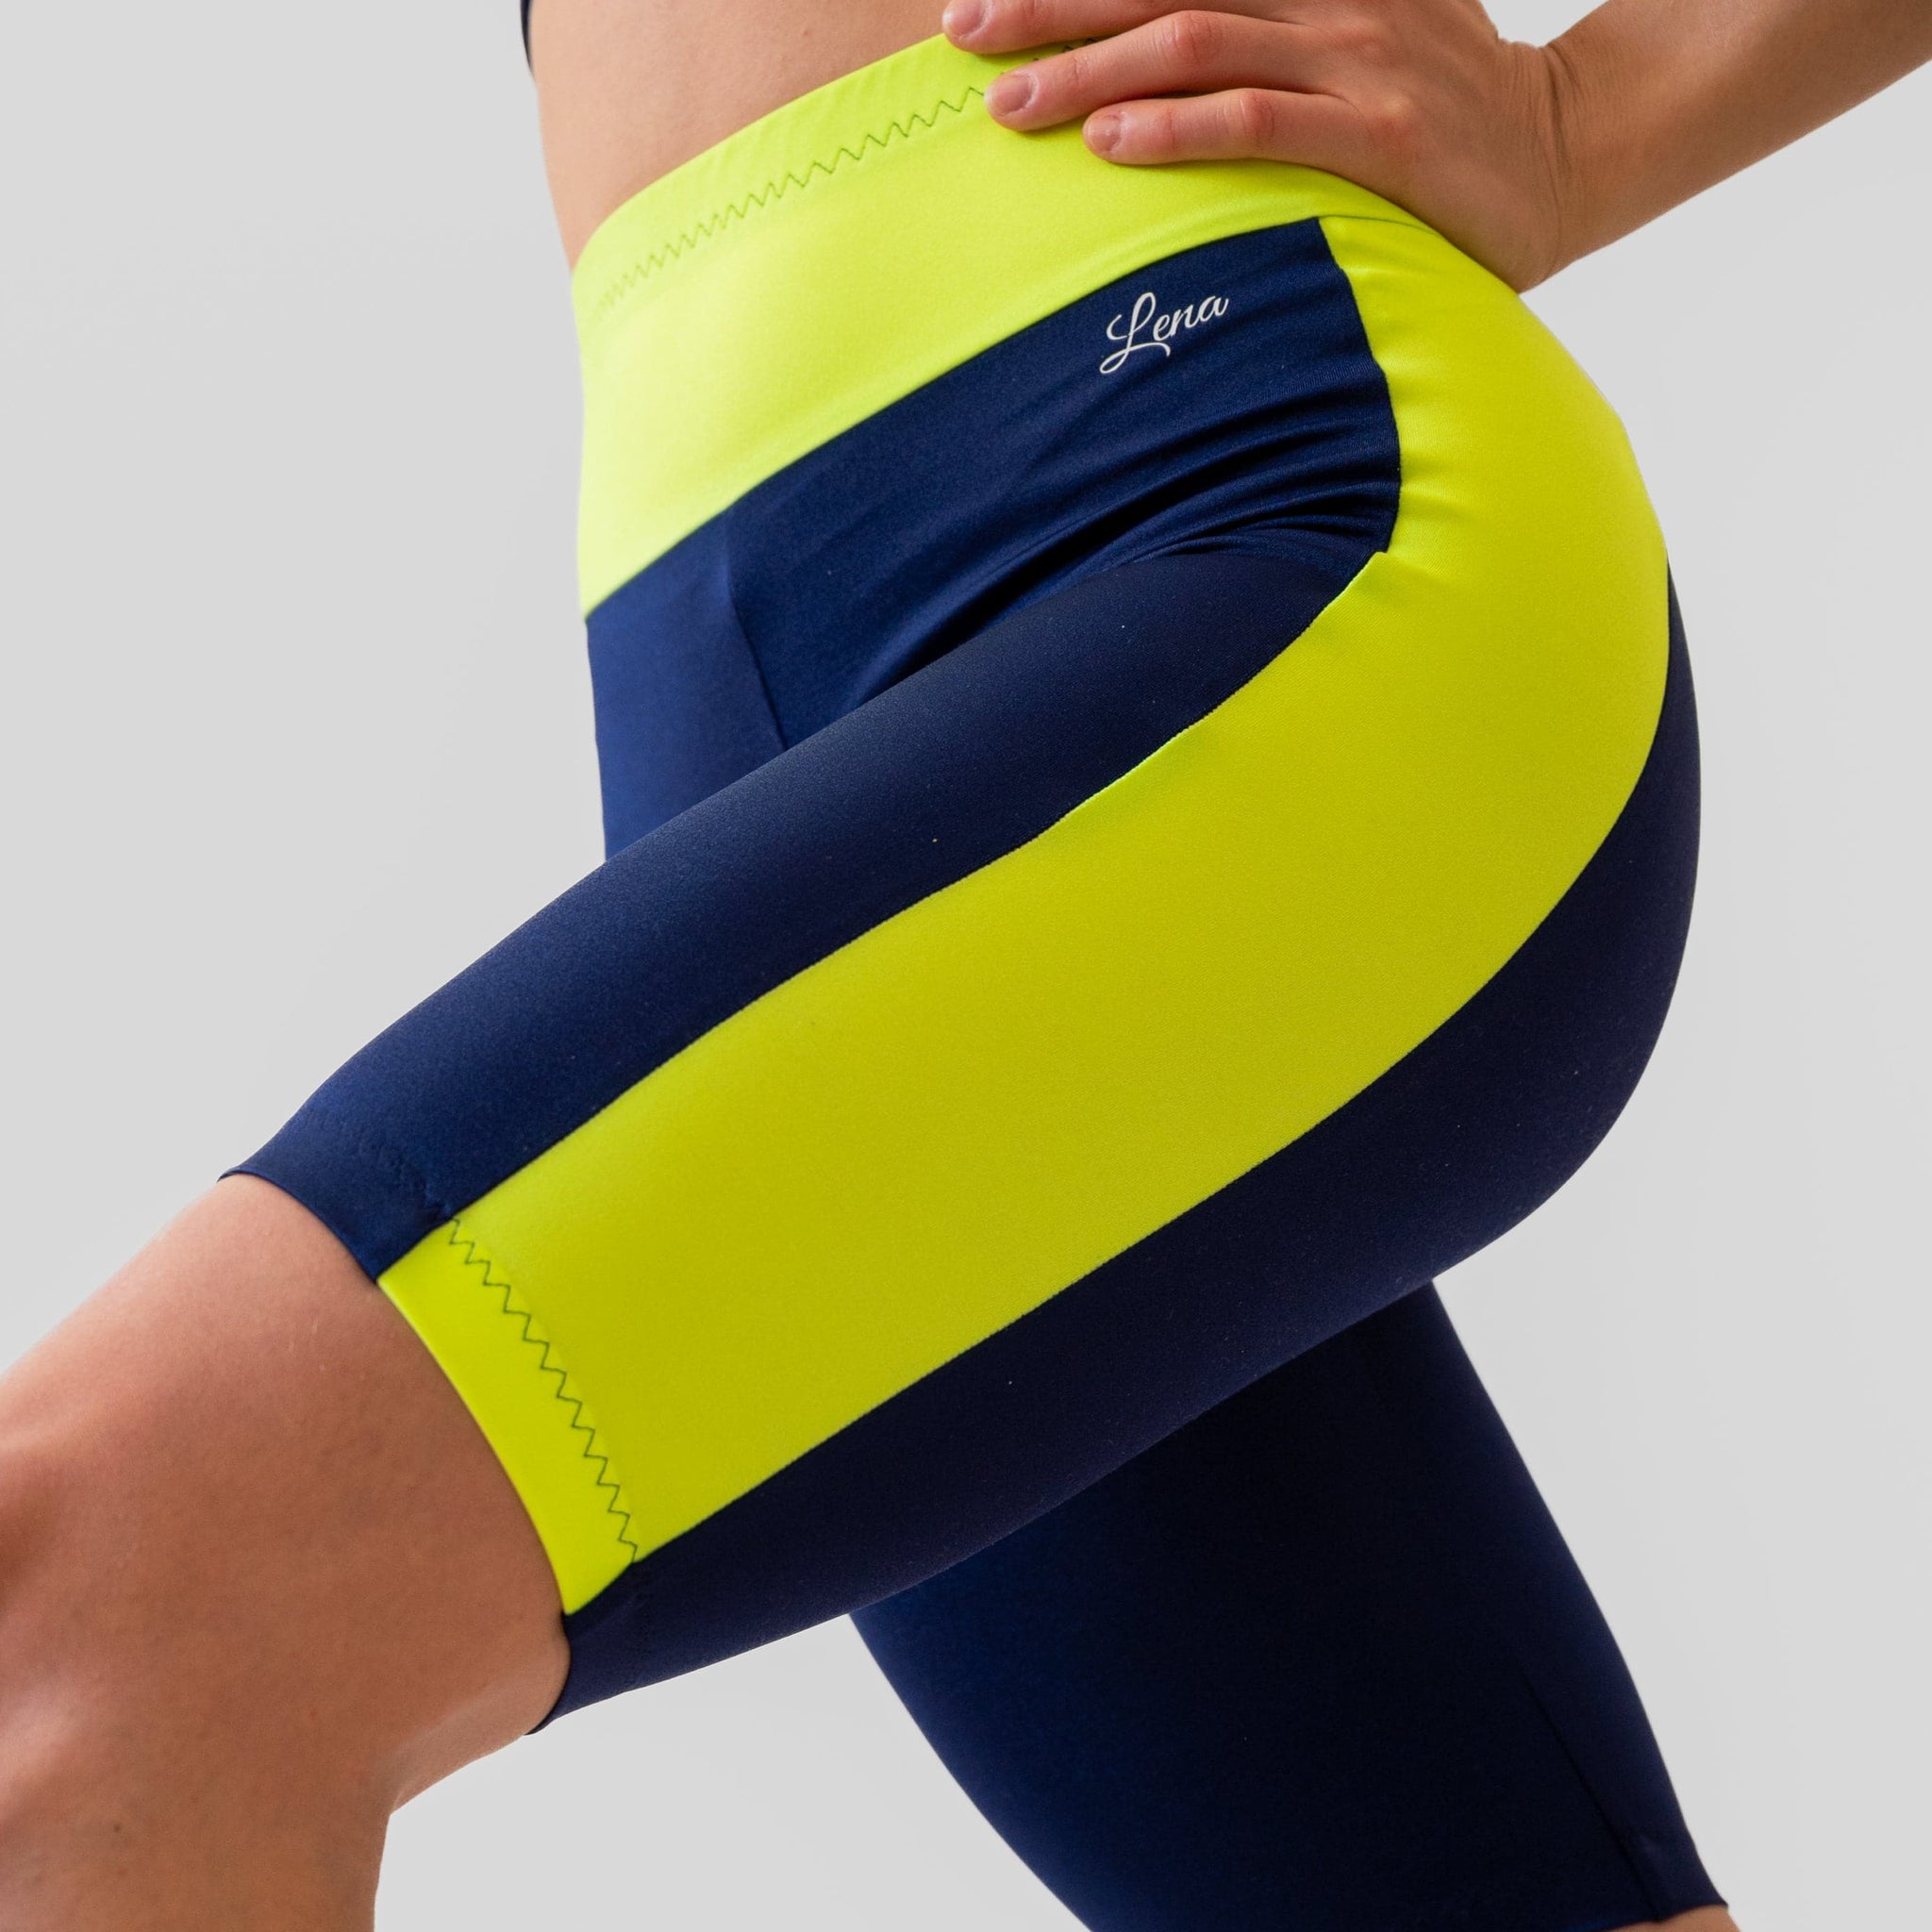 Blue and Yellow Bikers for Women for Yoga and Fitness Workouts by LENA Activewear